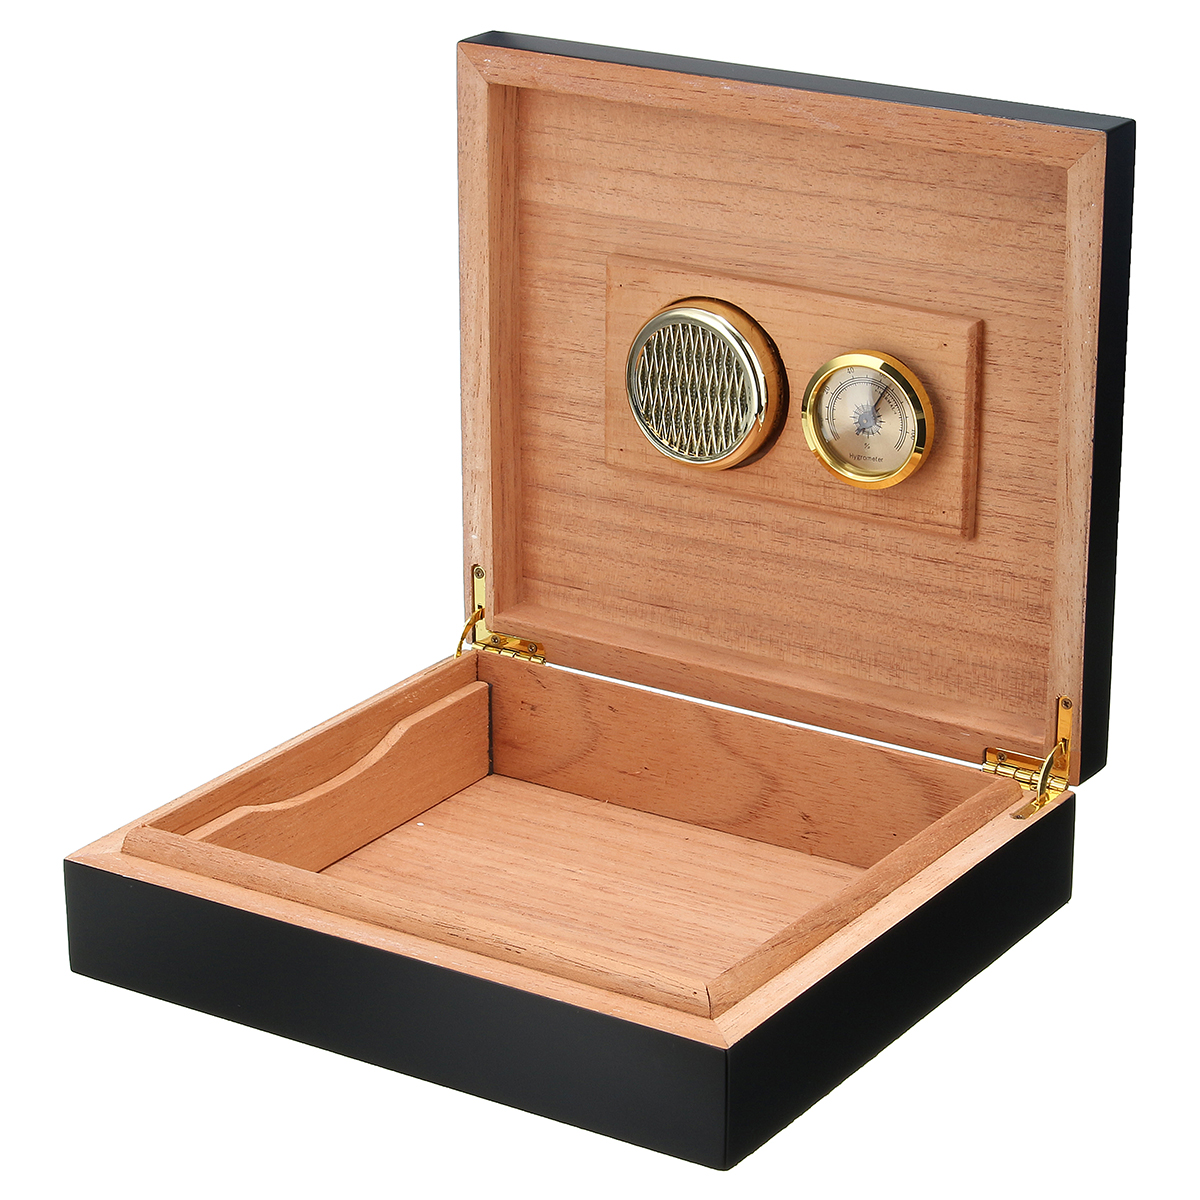 

Black Cedar Wood Lined Cigar Storage Box Humidor Humidifier Case with Hygrometer